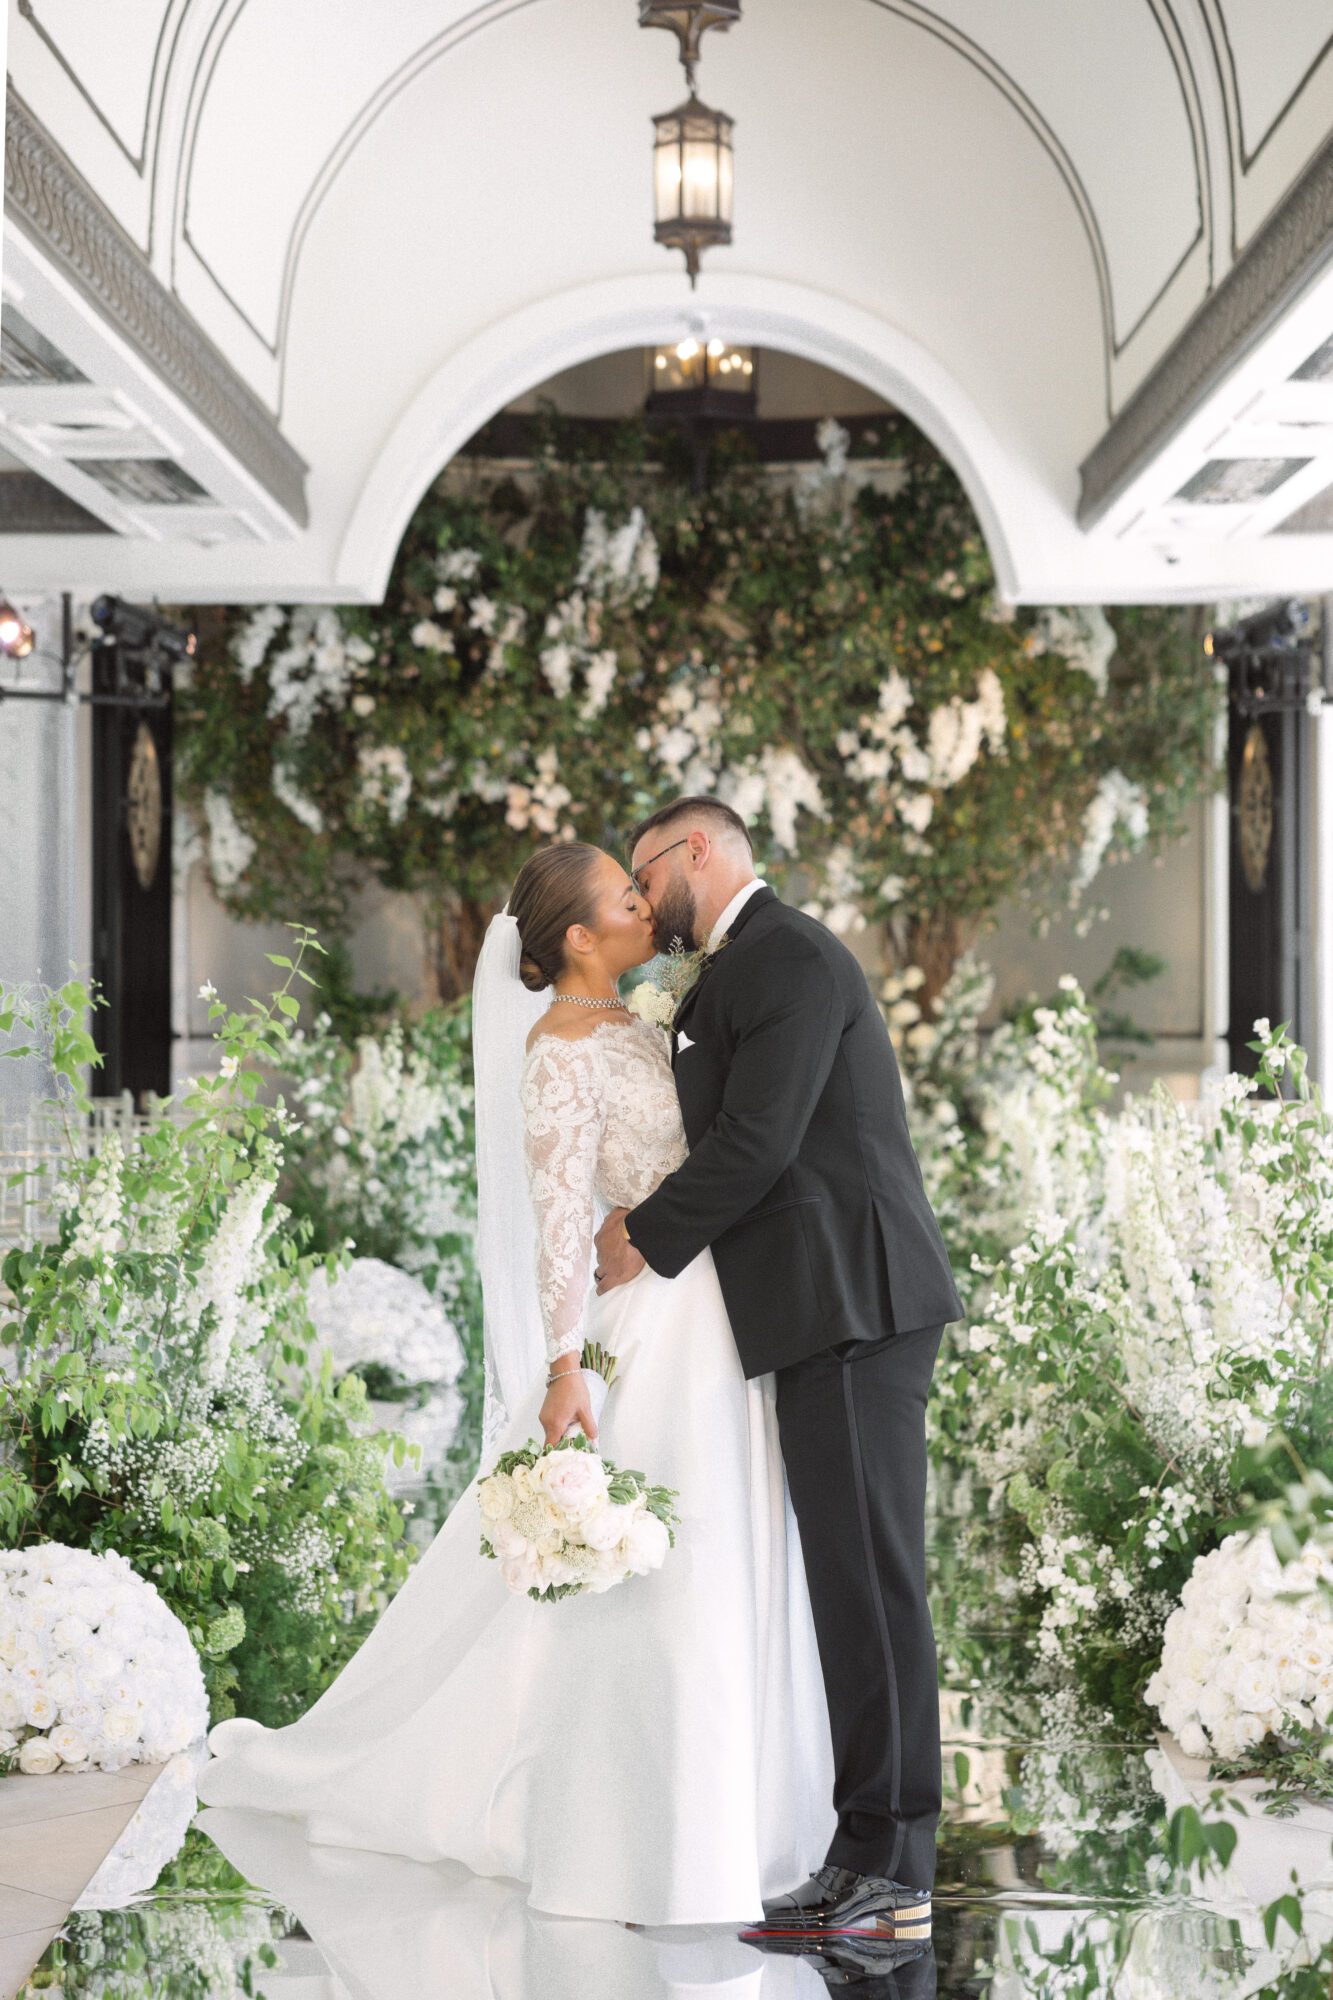 A bride and groom share a kiss amidst a lavish floral setting with white and green blooms designed by a luxury wedding florist in an elegant indoor venue with arched white ceilings.